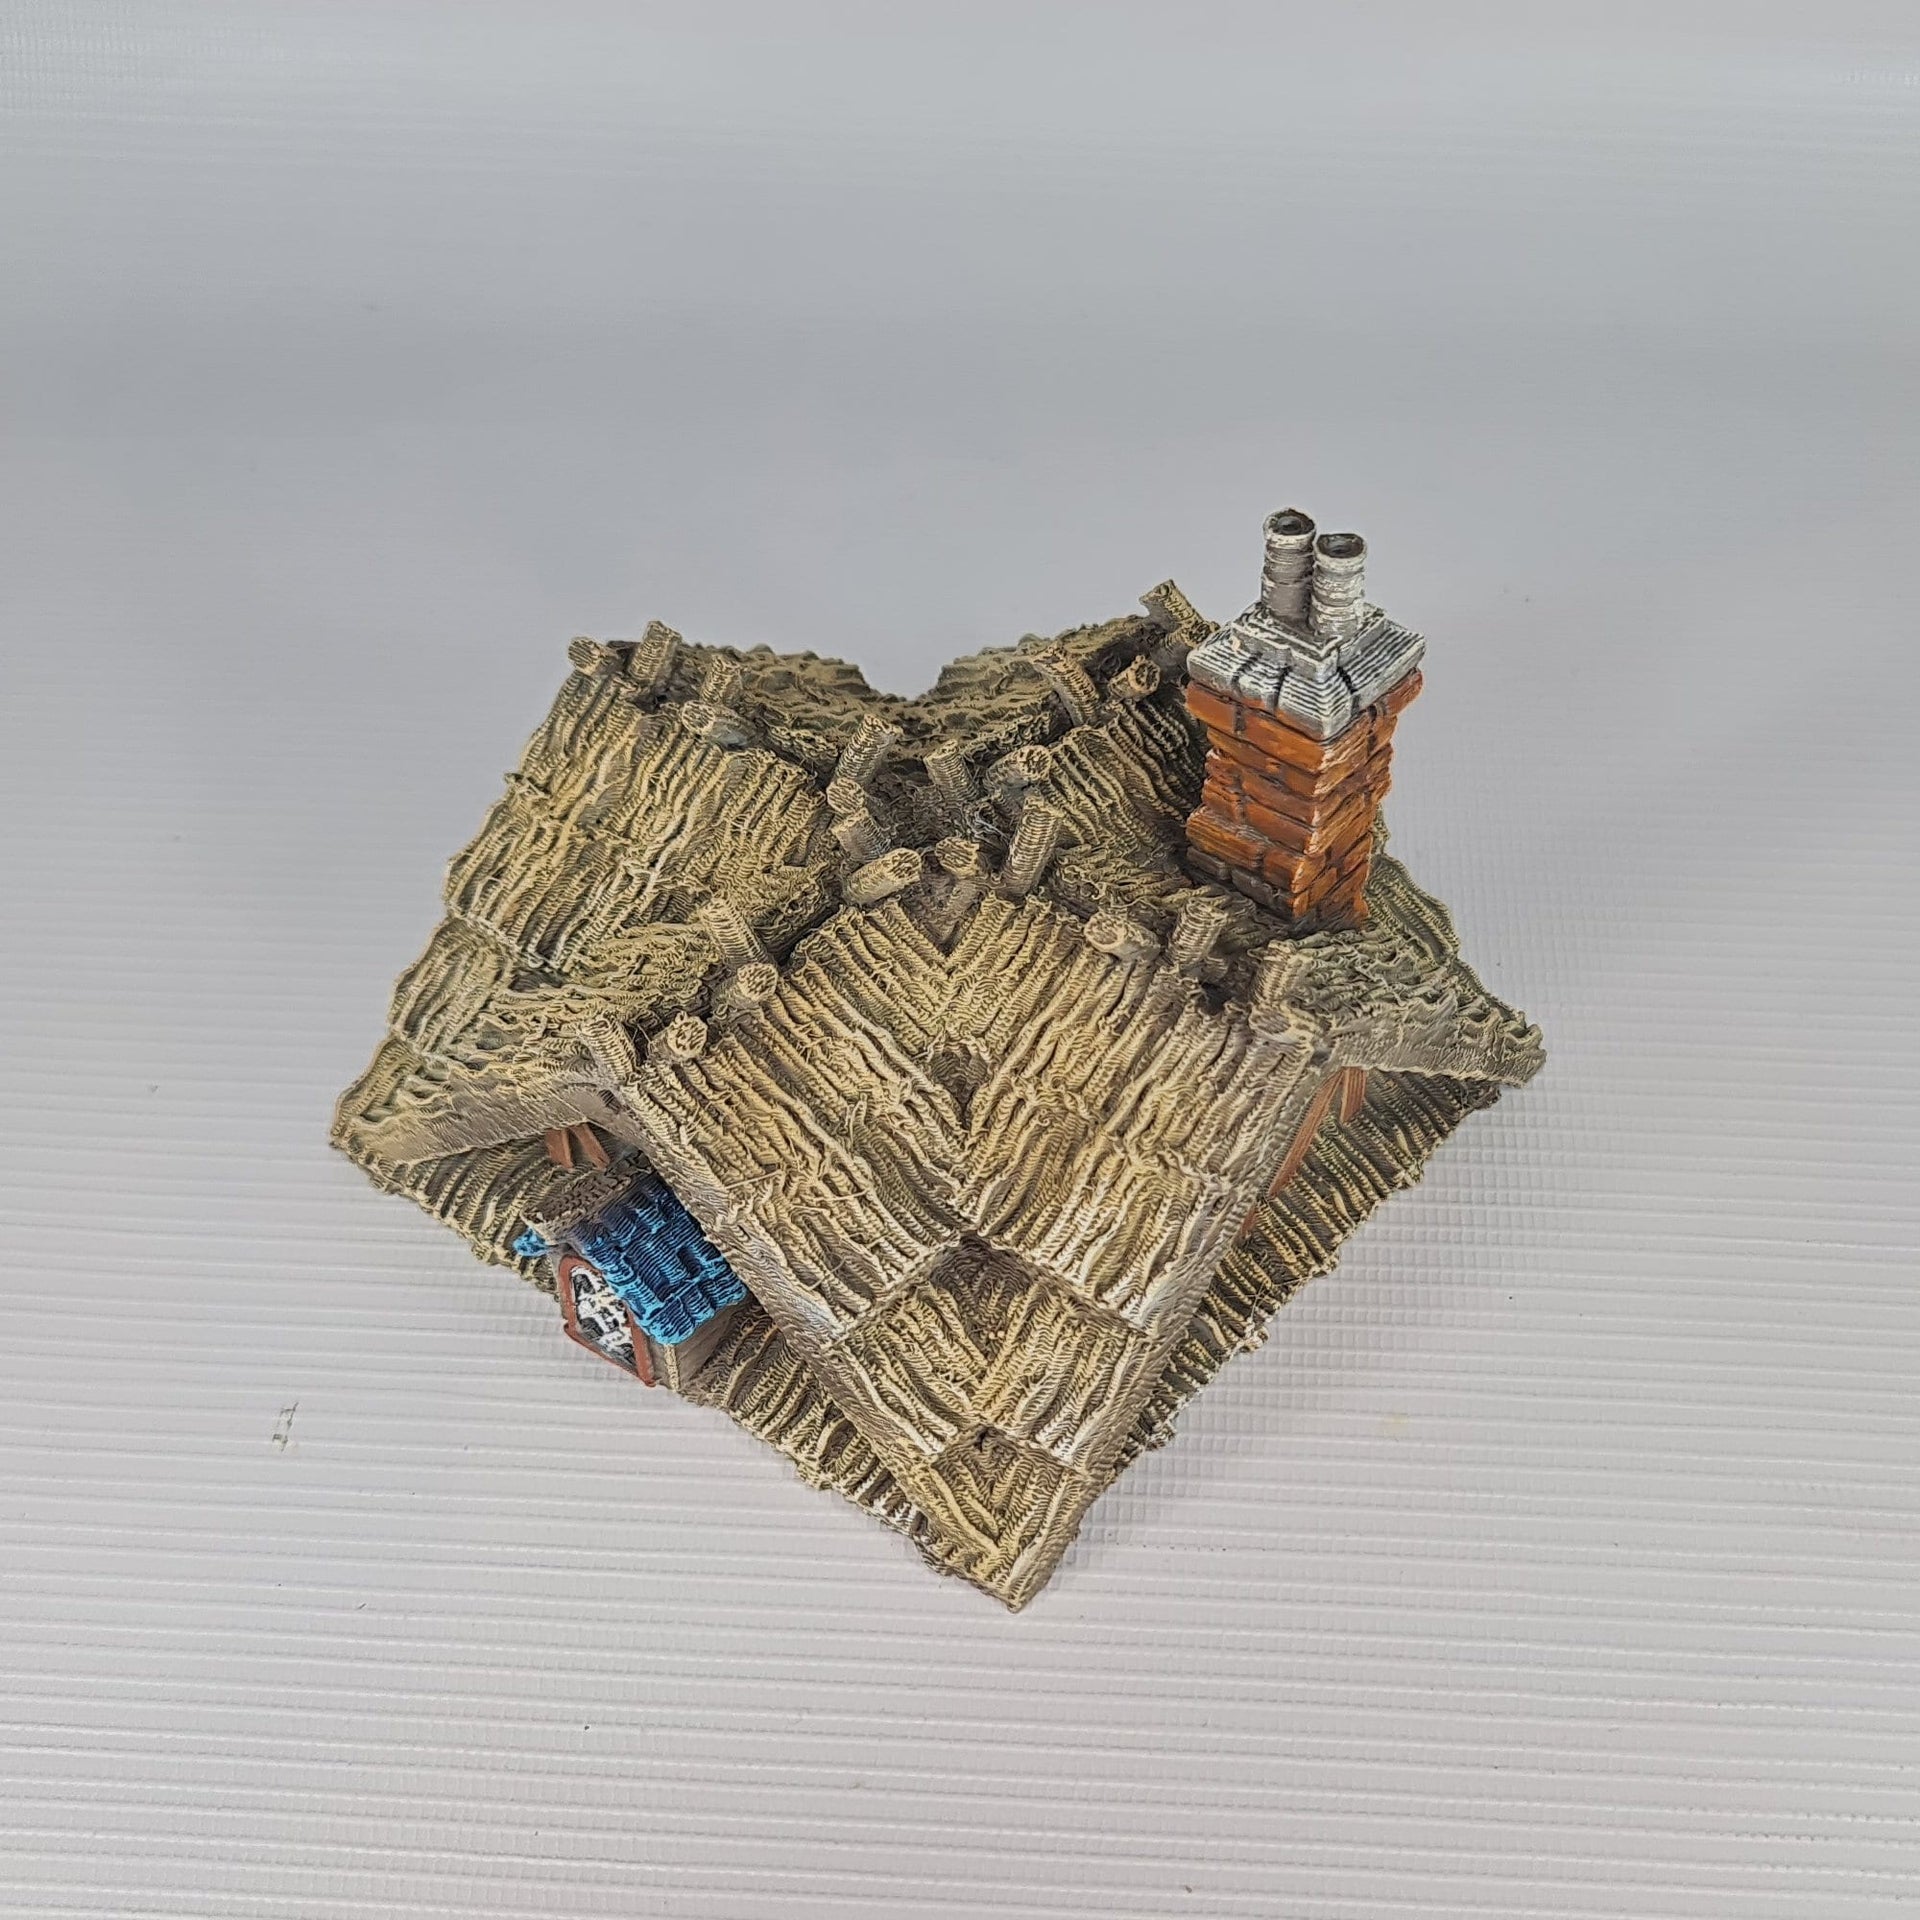 bridge-kit-with-toll - 3DP4U Medieval Town | Miniature | Wargaming | Roleplaying Games | 32mm | Playable | Filament | 3d printed